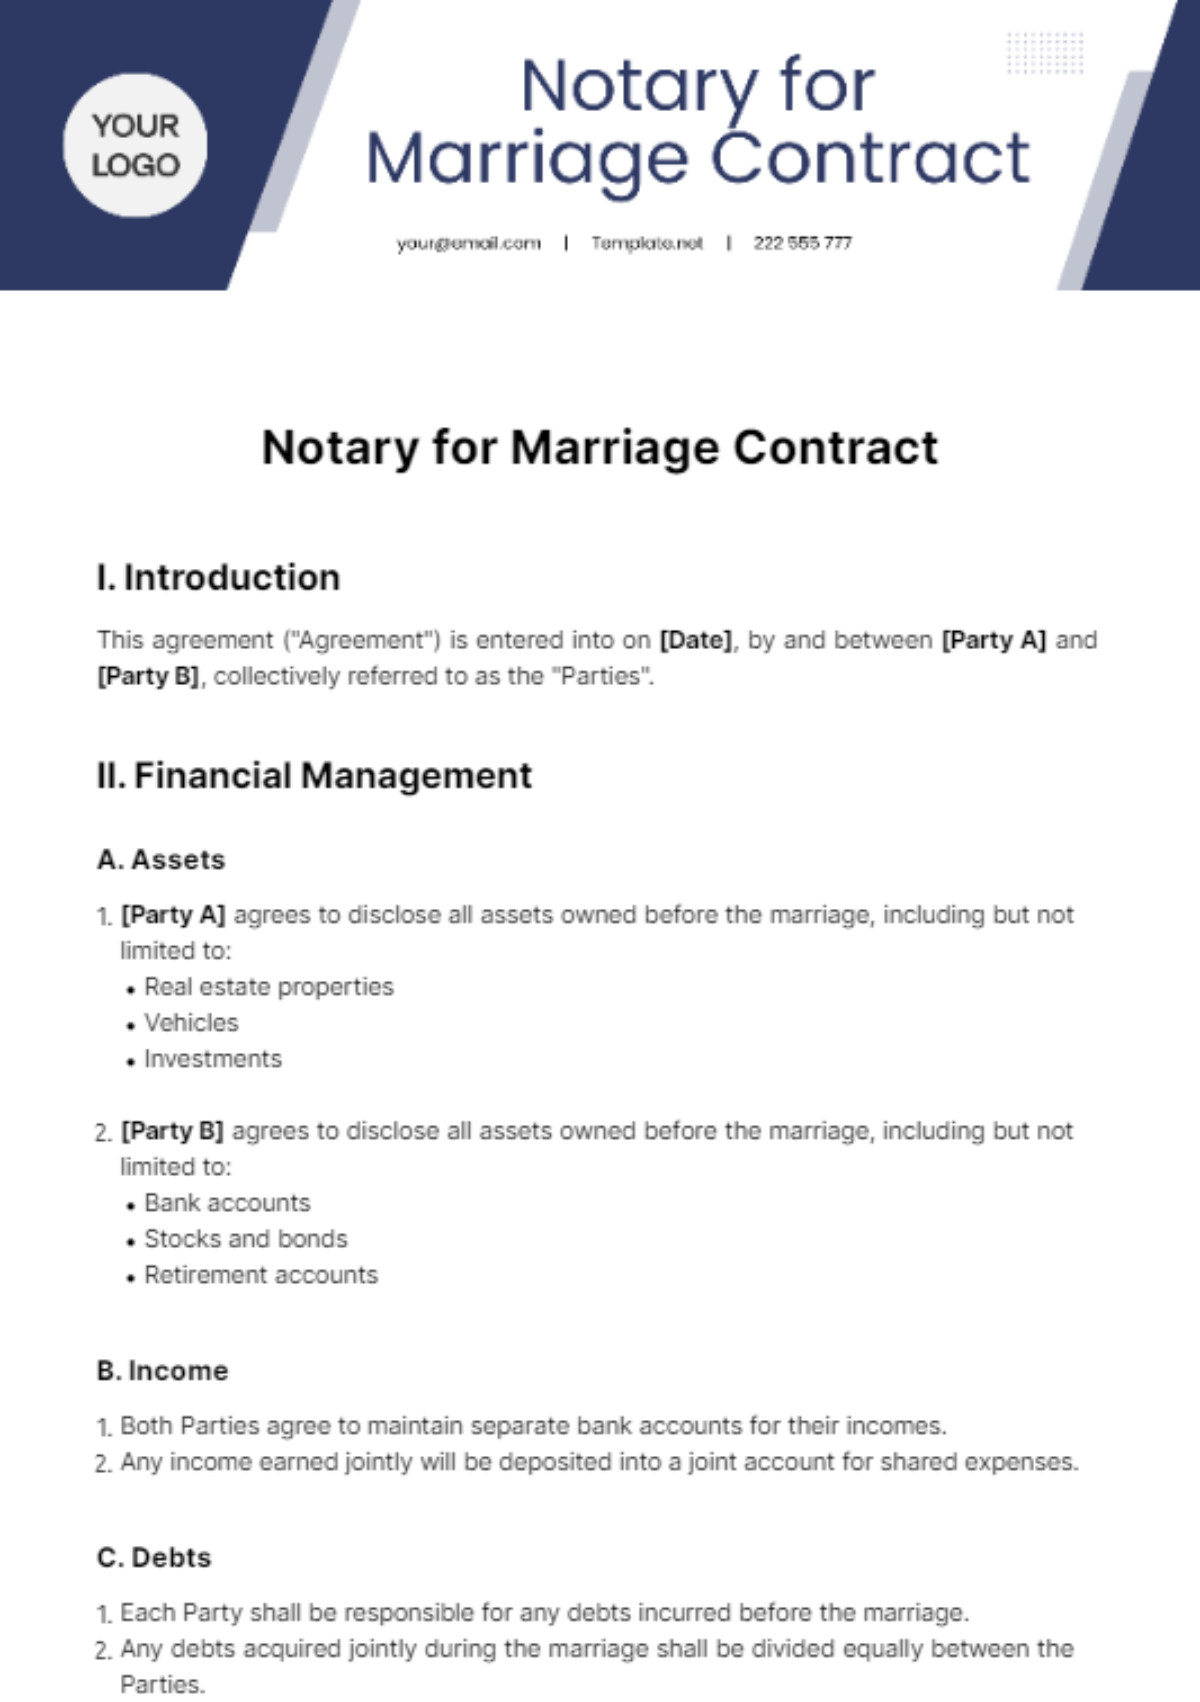 Free Notary for Marriage Contract Template